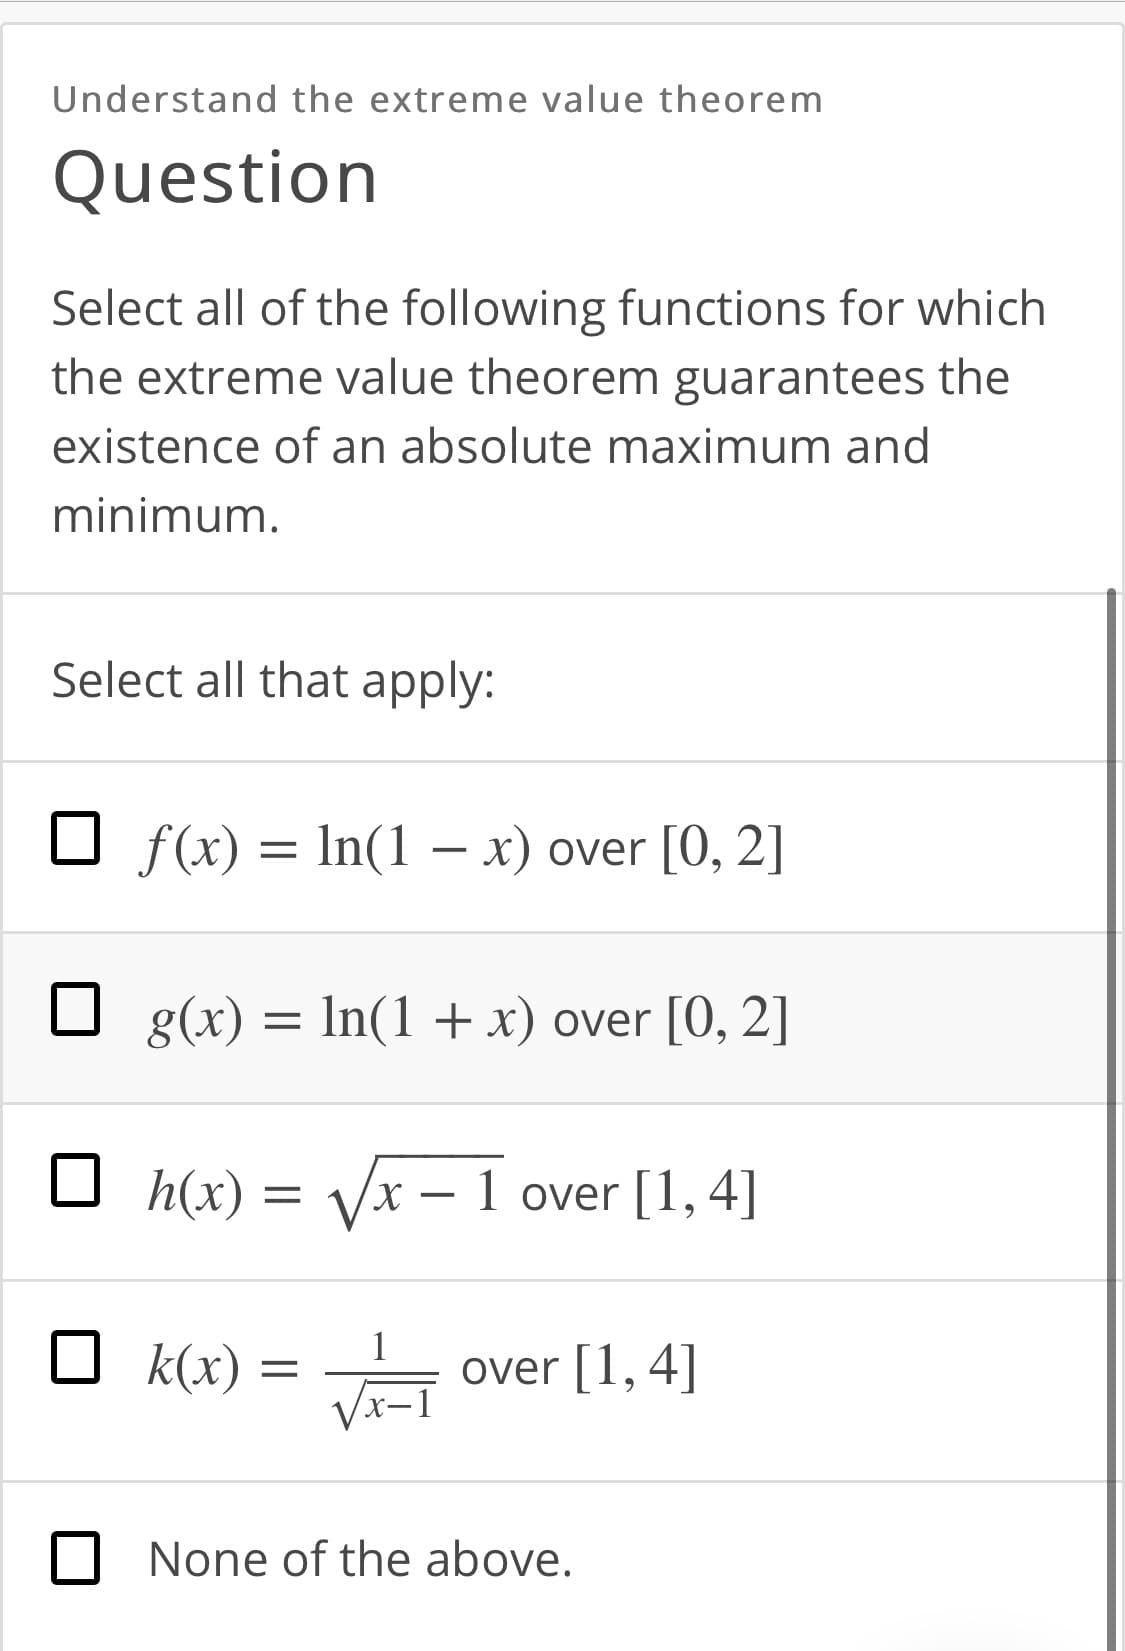 Understand the extreme value theorem
Question
Select all of the following functions for which
the extreme value theorem guarantees the
existence of an absolute maximum and
minimum.
Select all that apply:
f(x) = In(1 – x) over [0, 2]
g(x) = In(1 + x) over [0, 2]
O h(x) = Vx – 1 over [1, 4]
X.
O k(x)
1
over [1, 4]
VI-
None of the above.
